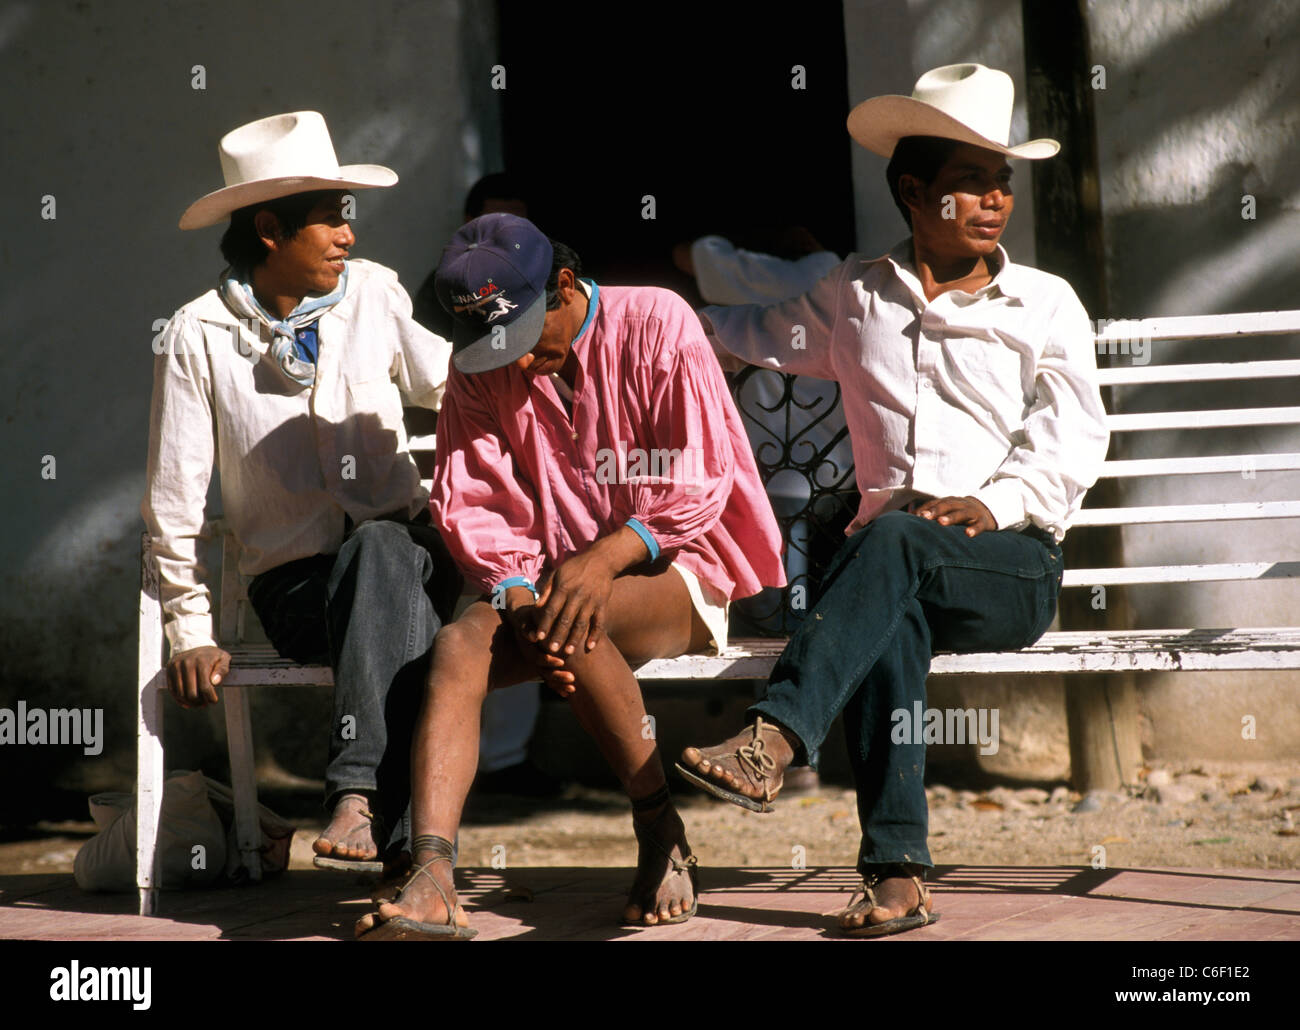 Indigenous Tarahumara men in the Copper Canyon township of Batopilas await the outcome of a political protest. Stock Photo